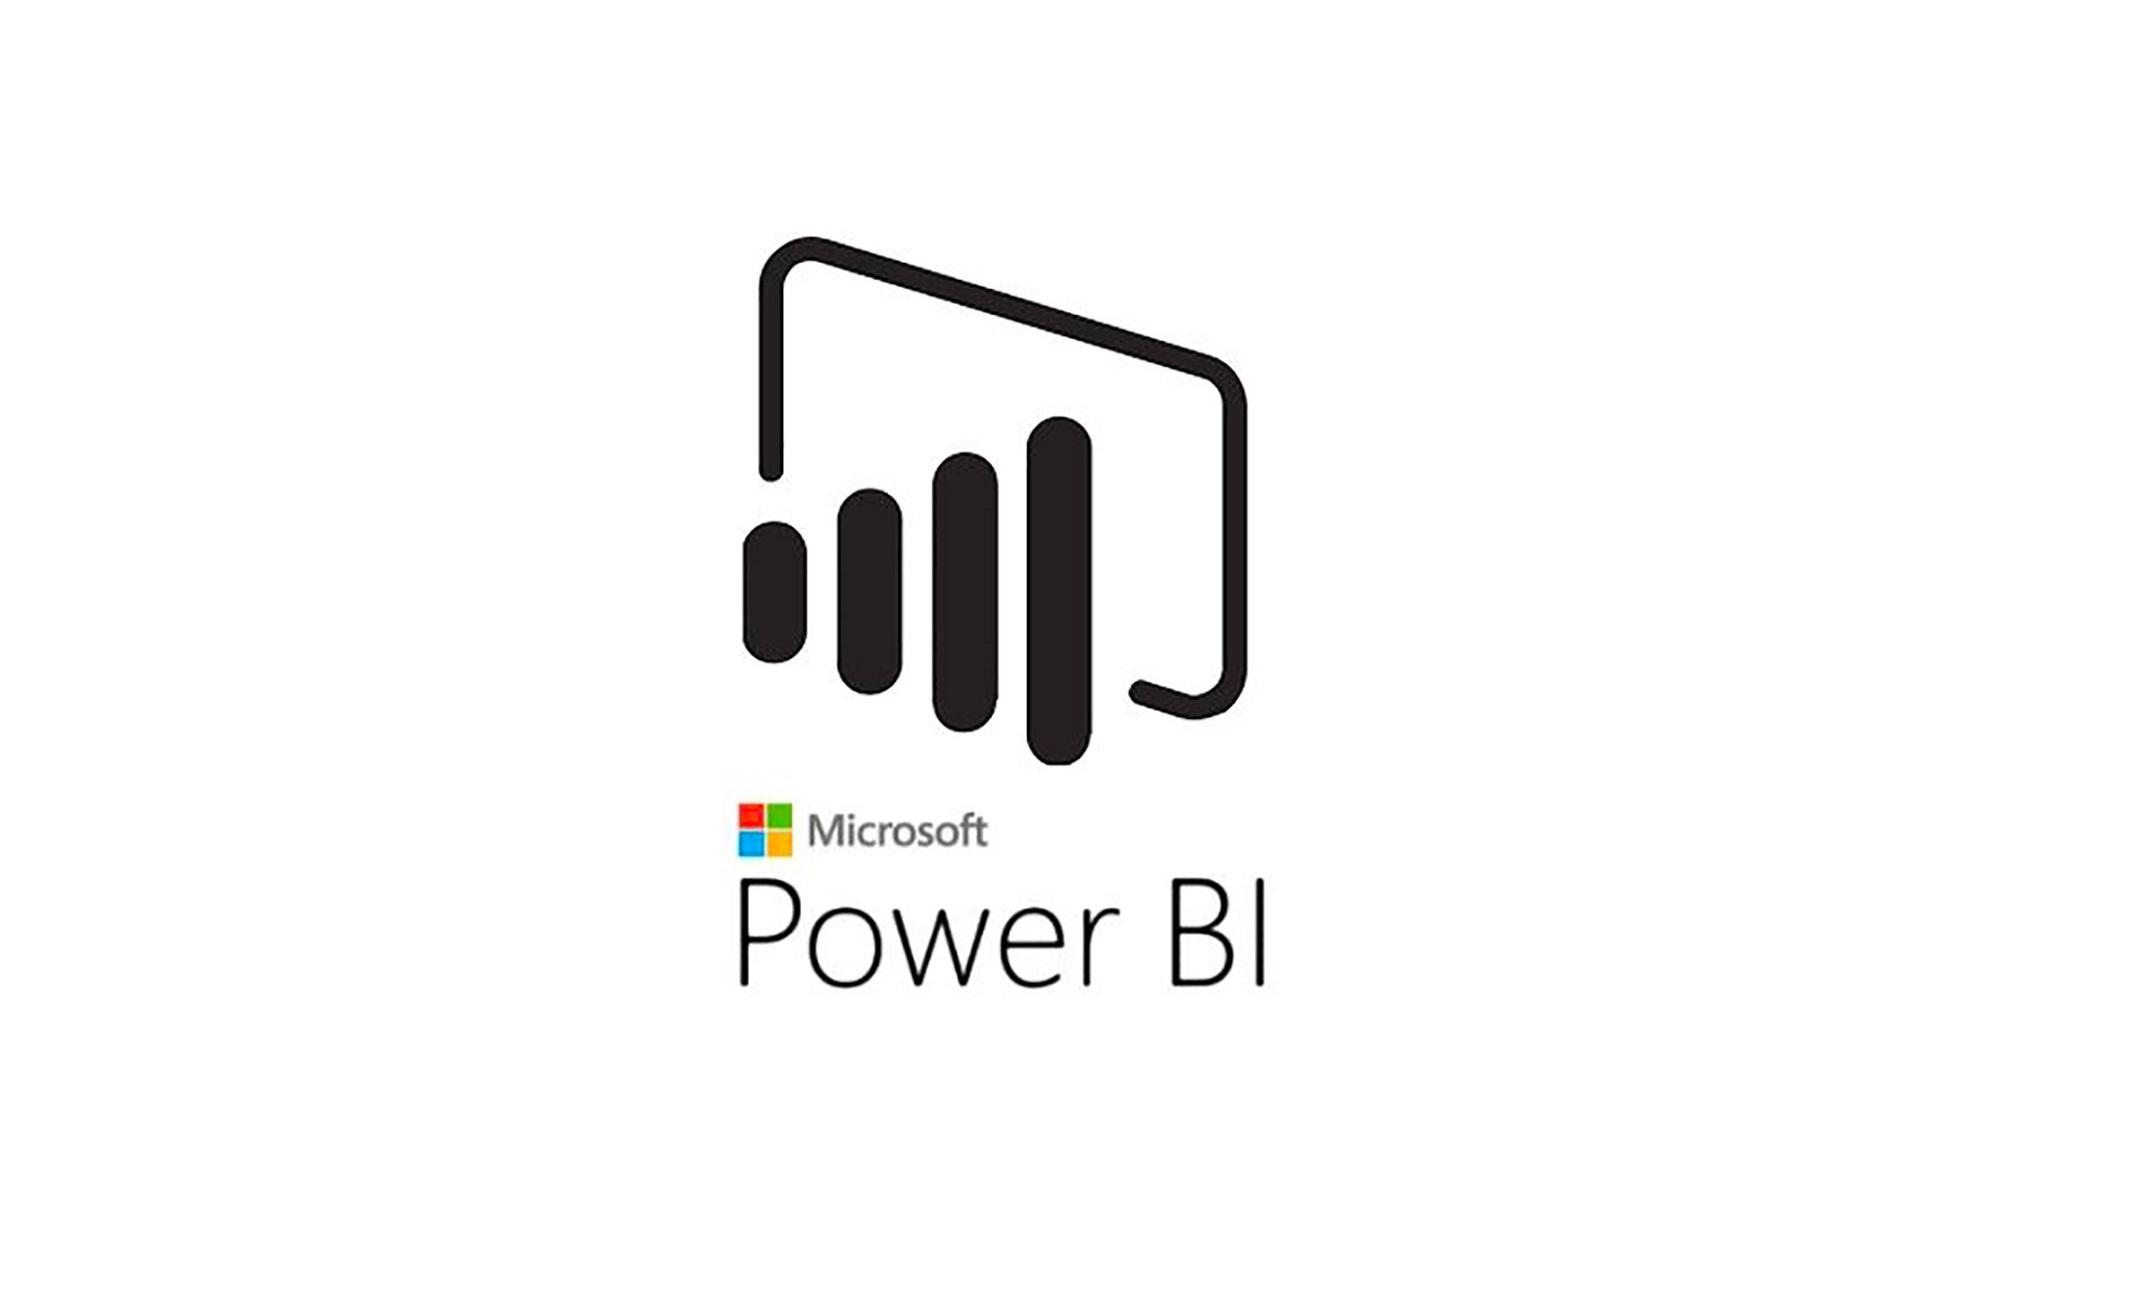 4 Weeks Microsoft Power BI Training in New York City | Introduction to Power BI training for beginners | Getting started with Power BI | What is Power BI | March 30, 2020 - April 22, 2020